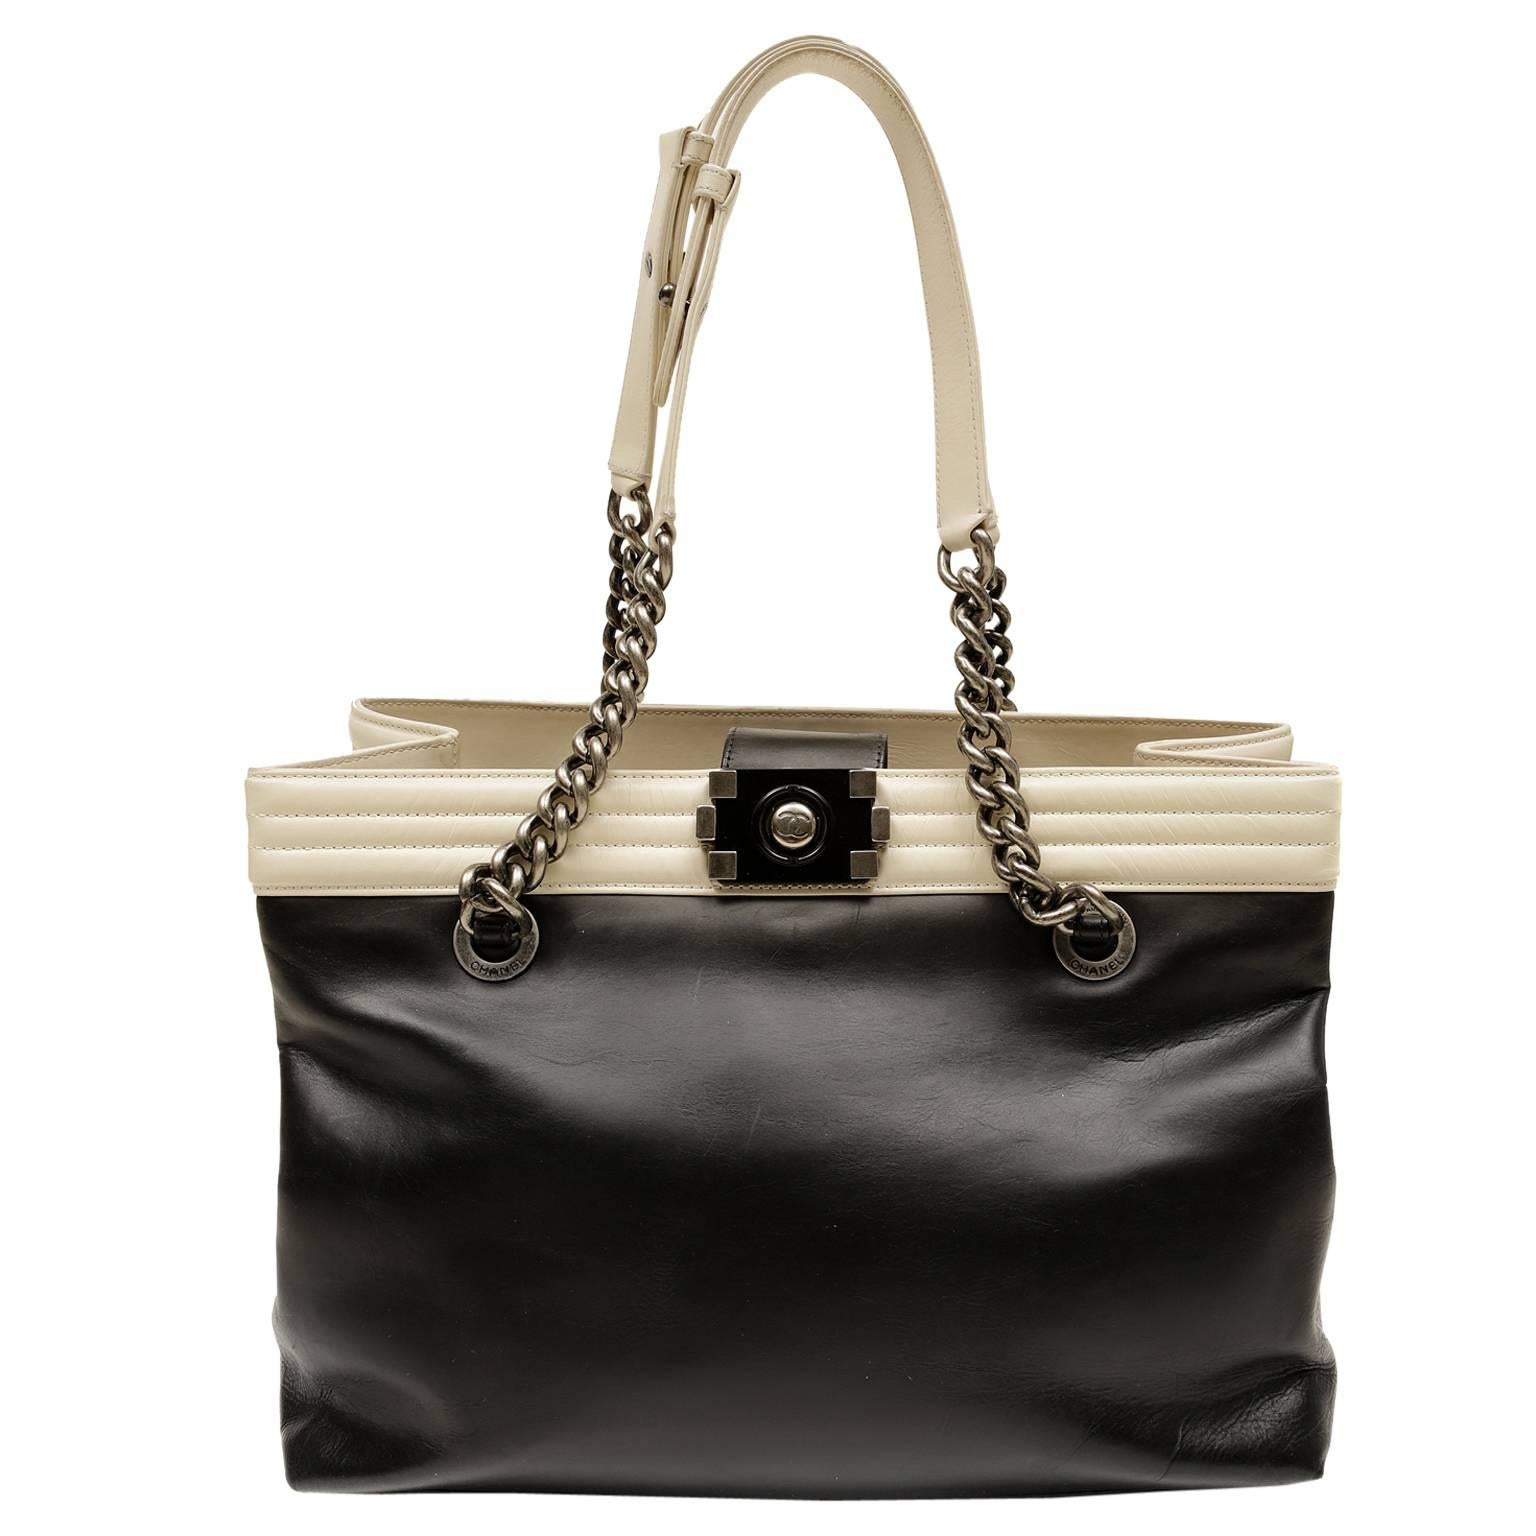 Chanel Black and Cream Leather Boy Bag Tote For Sale